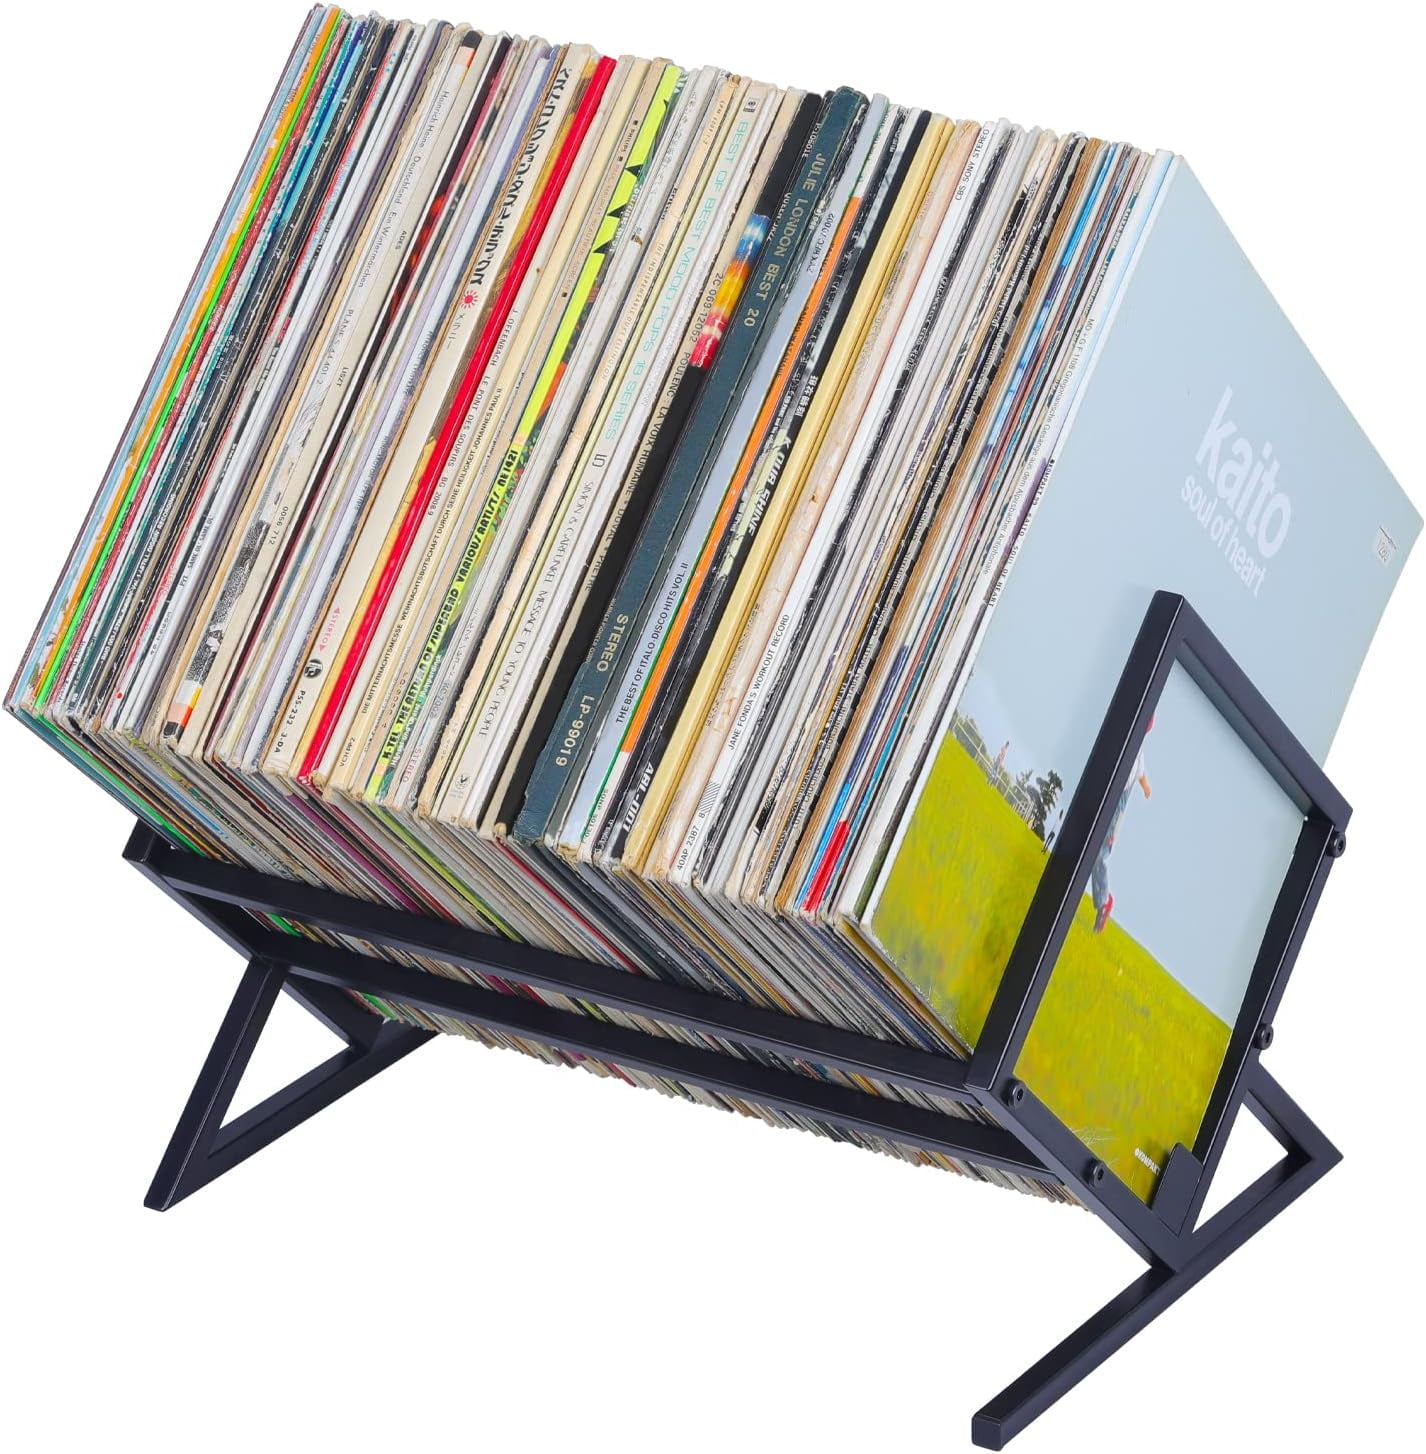  R RUIMEI Vinyl Record Holder, Vinyl Record Storage, Stackable  Up to 210 Albums, Reinforced Baffle Design, Organize Collection and Protect  Records with this Storage Organizer Shelf, Black : Home & Kitchen